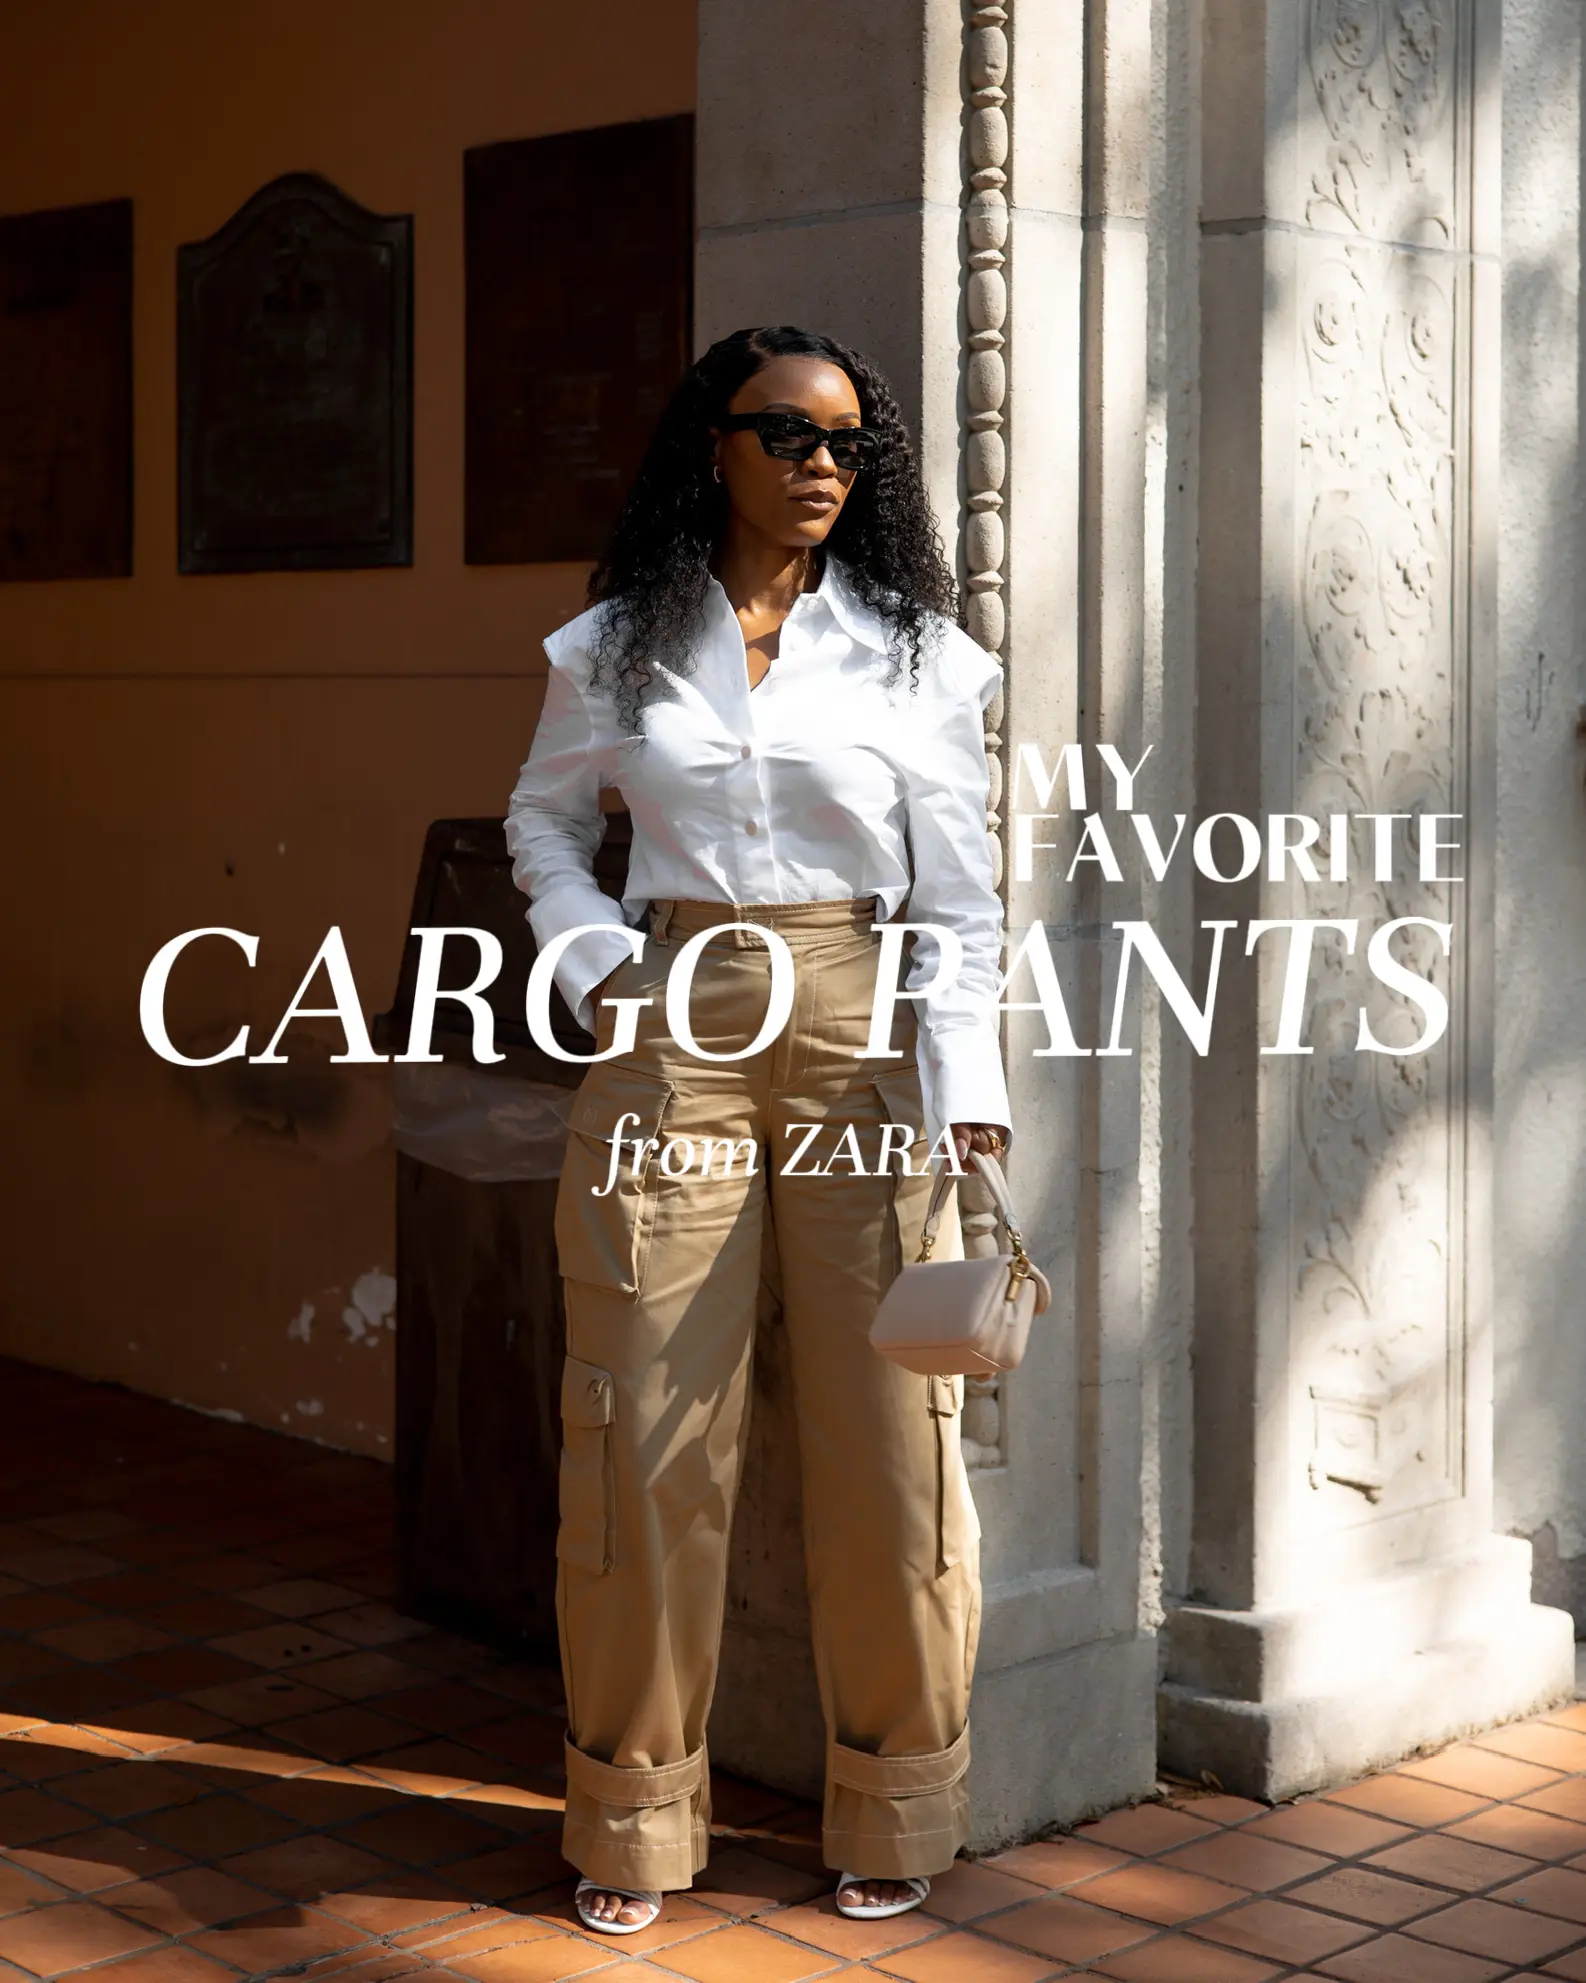 How I style my new #Zara pants for work!: How I dress as a